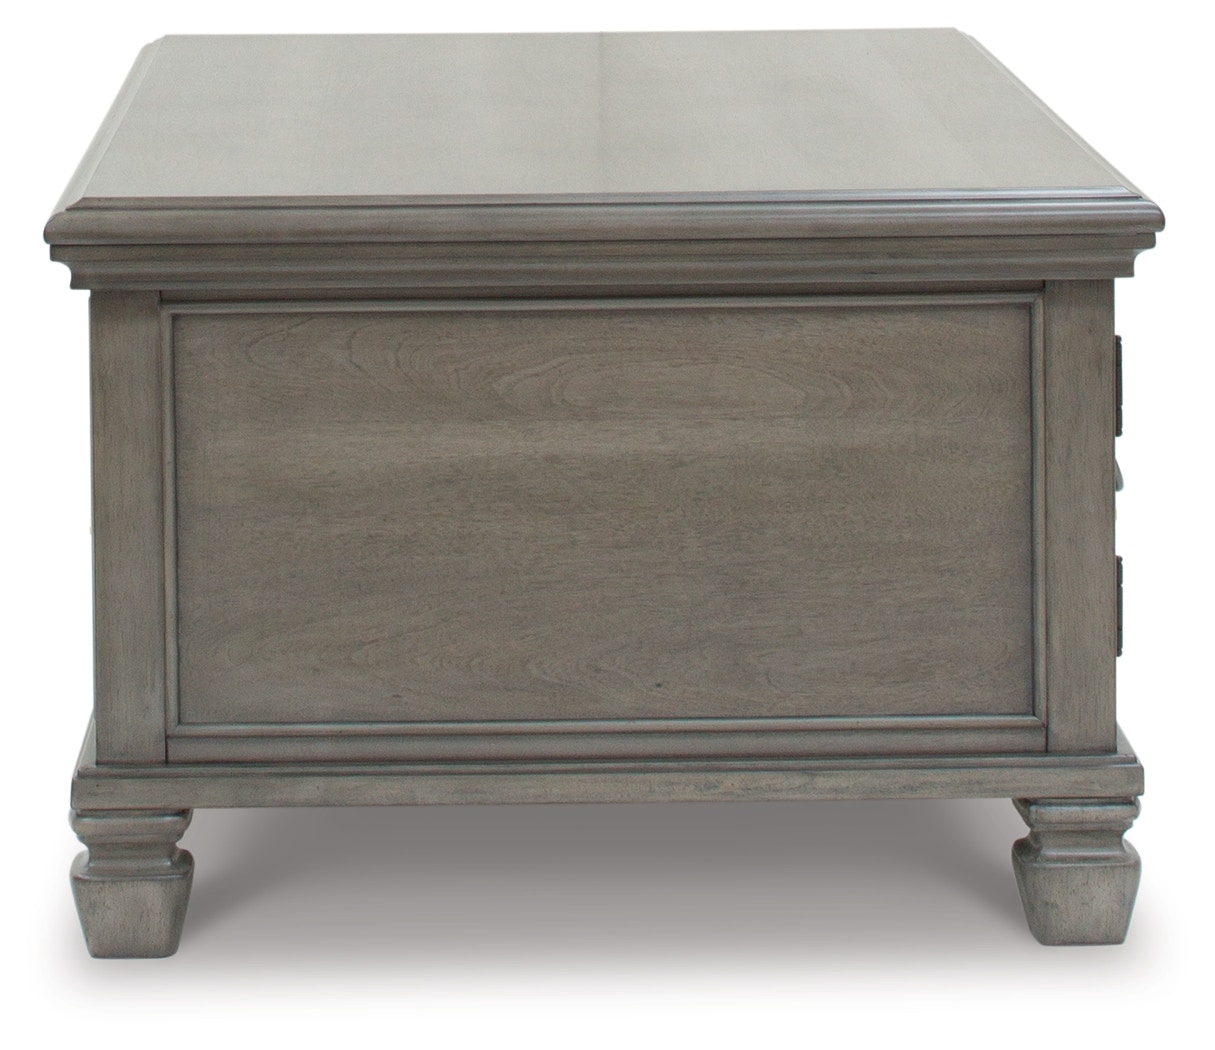 Signature Design by Ashley Living Room Lexorne Coffee Table T924-1 